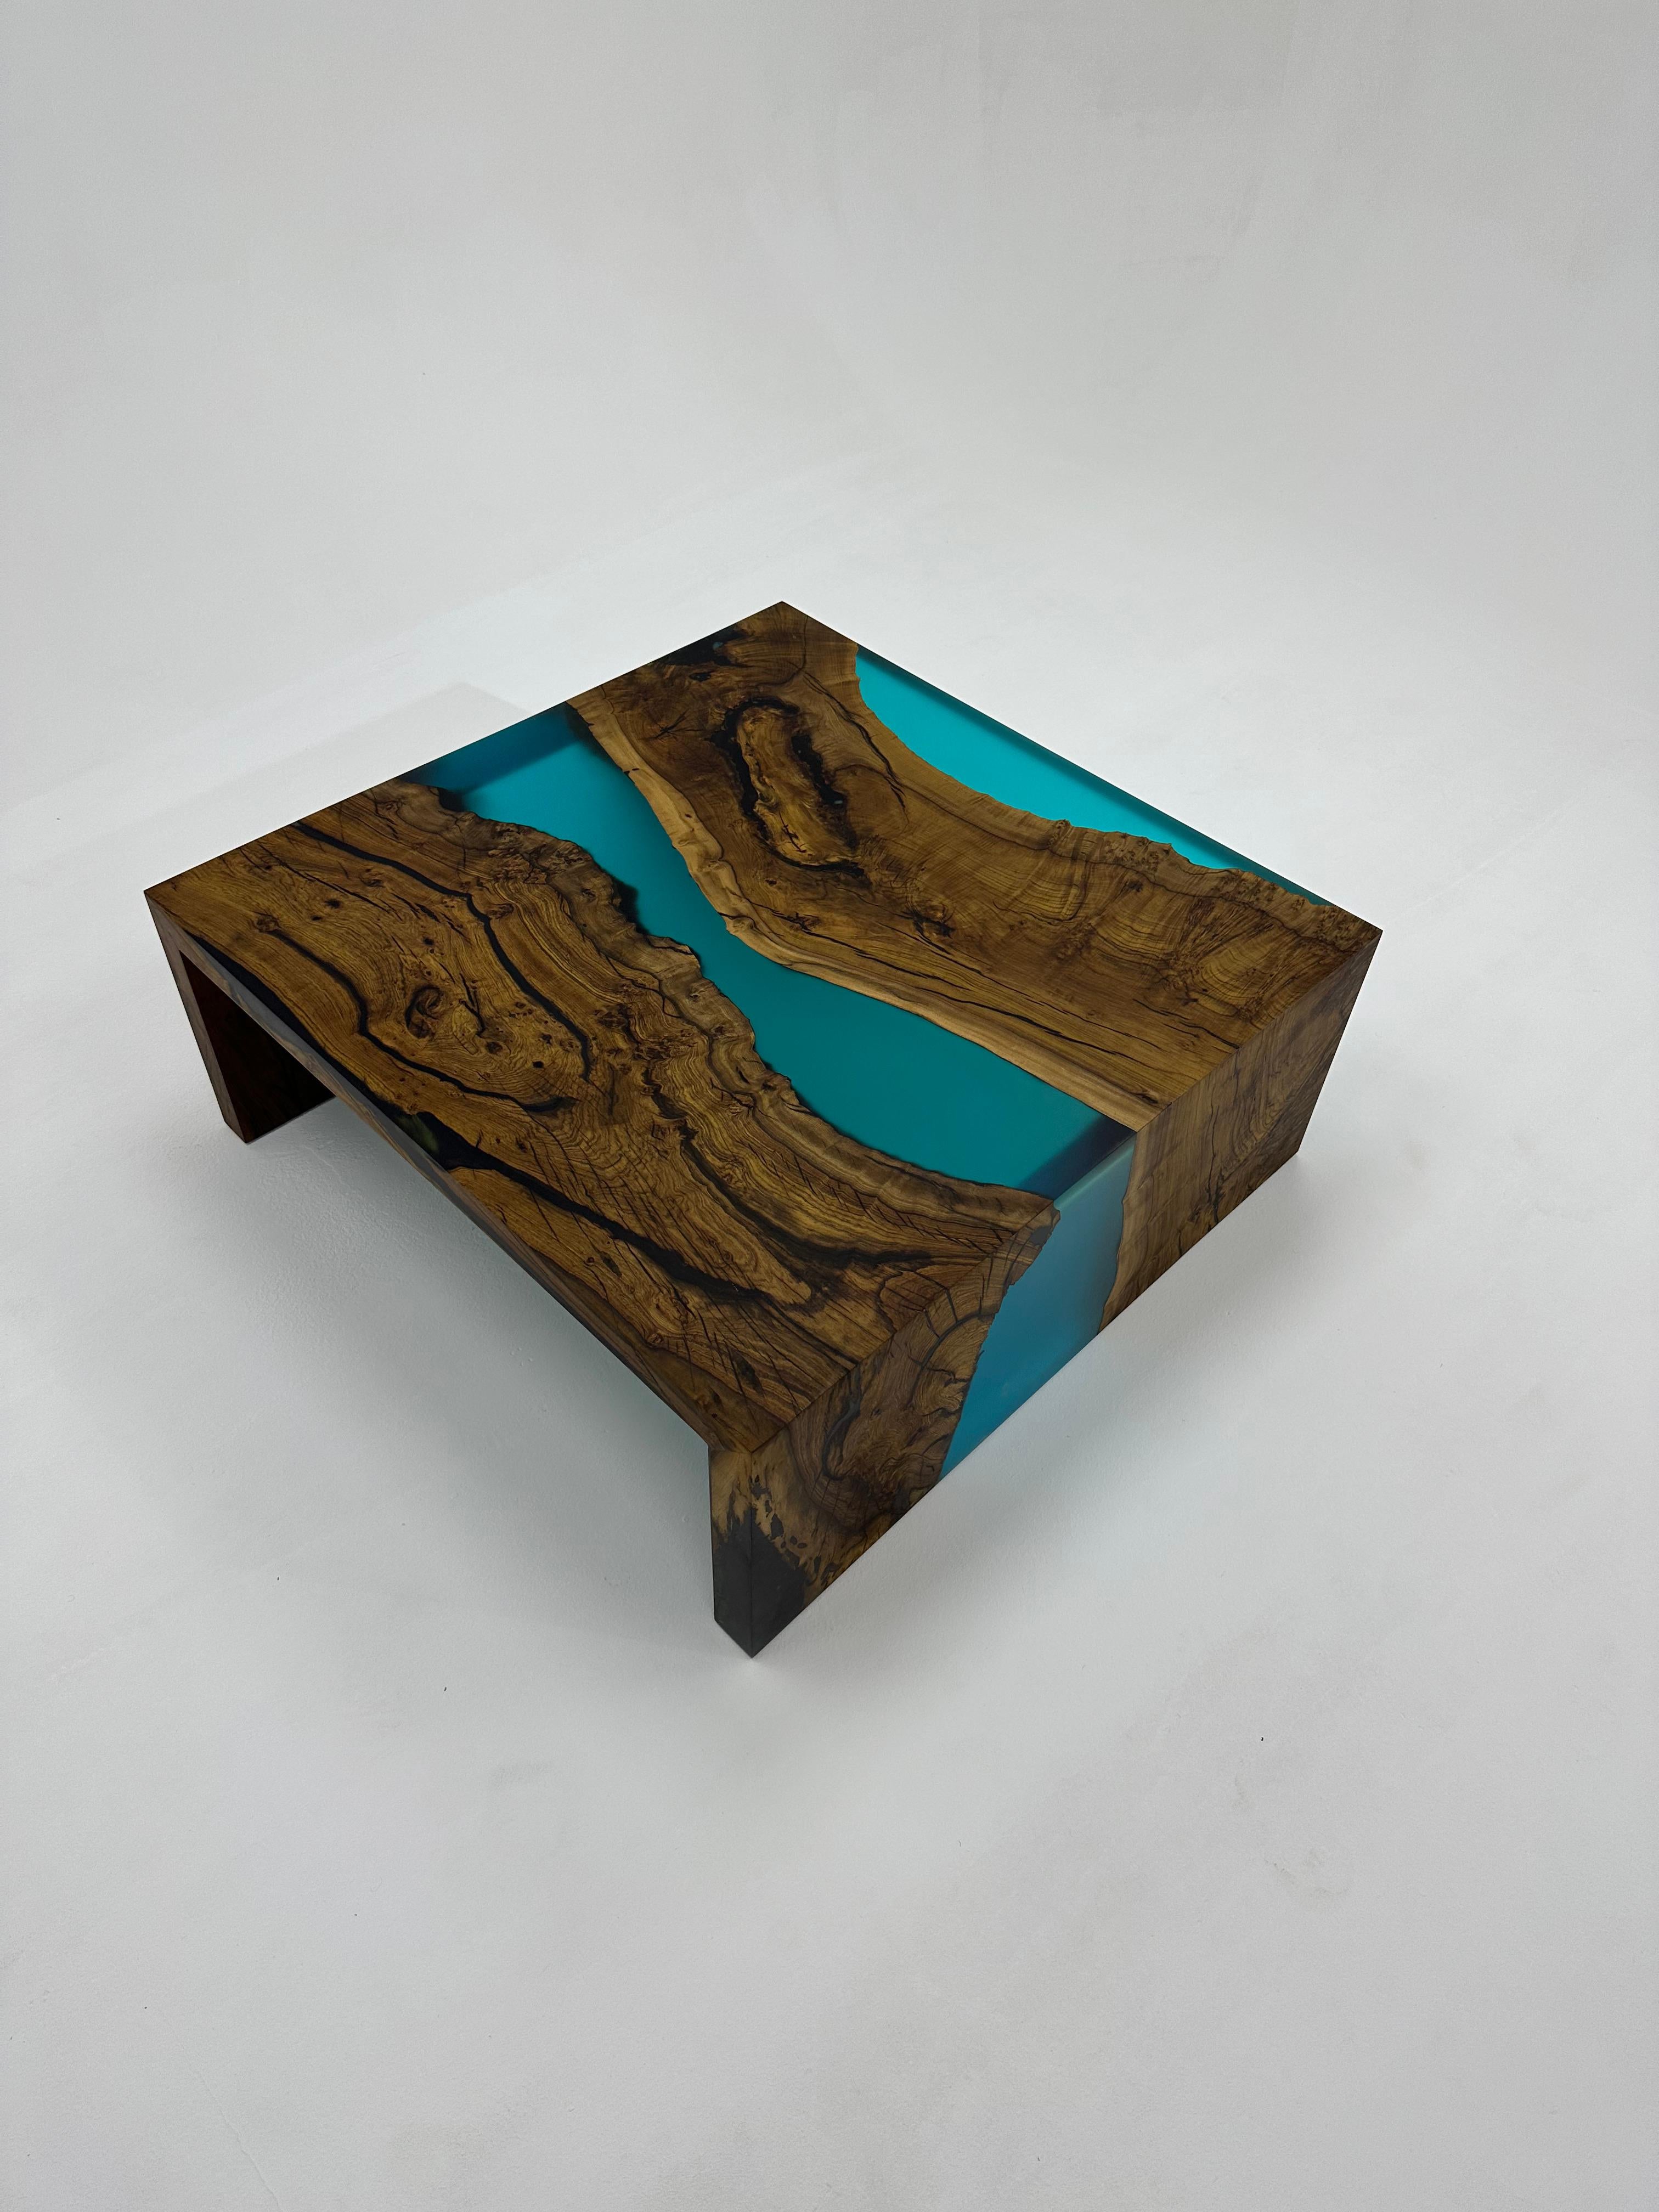 Waterfall Walnut Epoxy Coffee Table

Presenting our Epoxy Waterfall Coffee Table – a true sample of craftsmanship and elegance. This exceptional piece of furniture is designed to be more than just a coffee table; it's a statement of refined taste